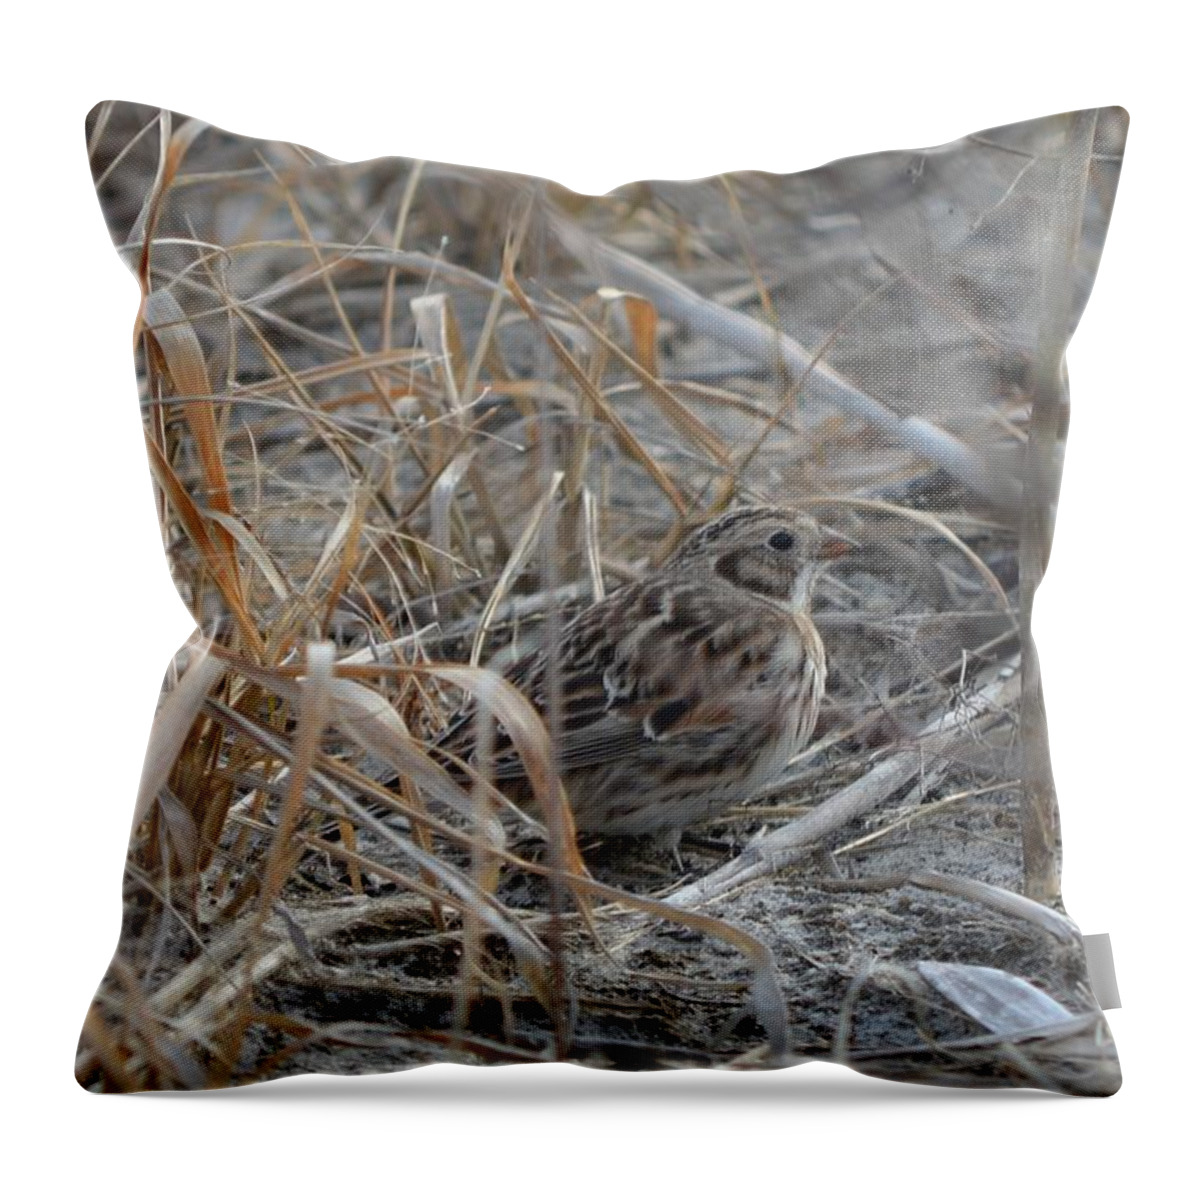 Lapland Longspur Throw Pillow featuring the photograph Lapland Longspur III by James Petersen